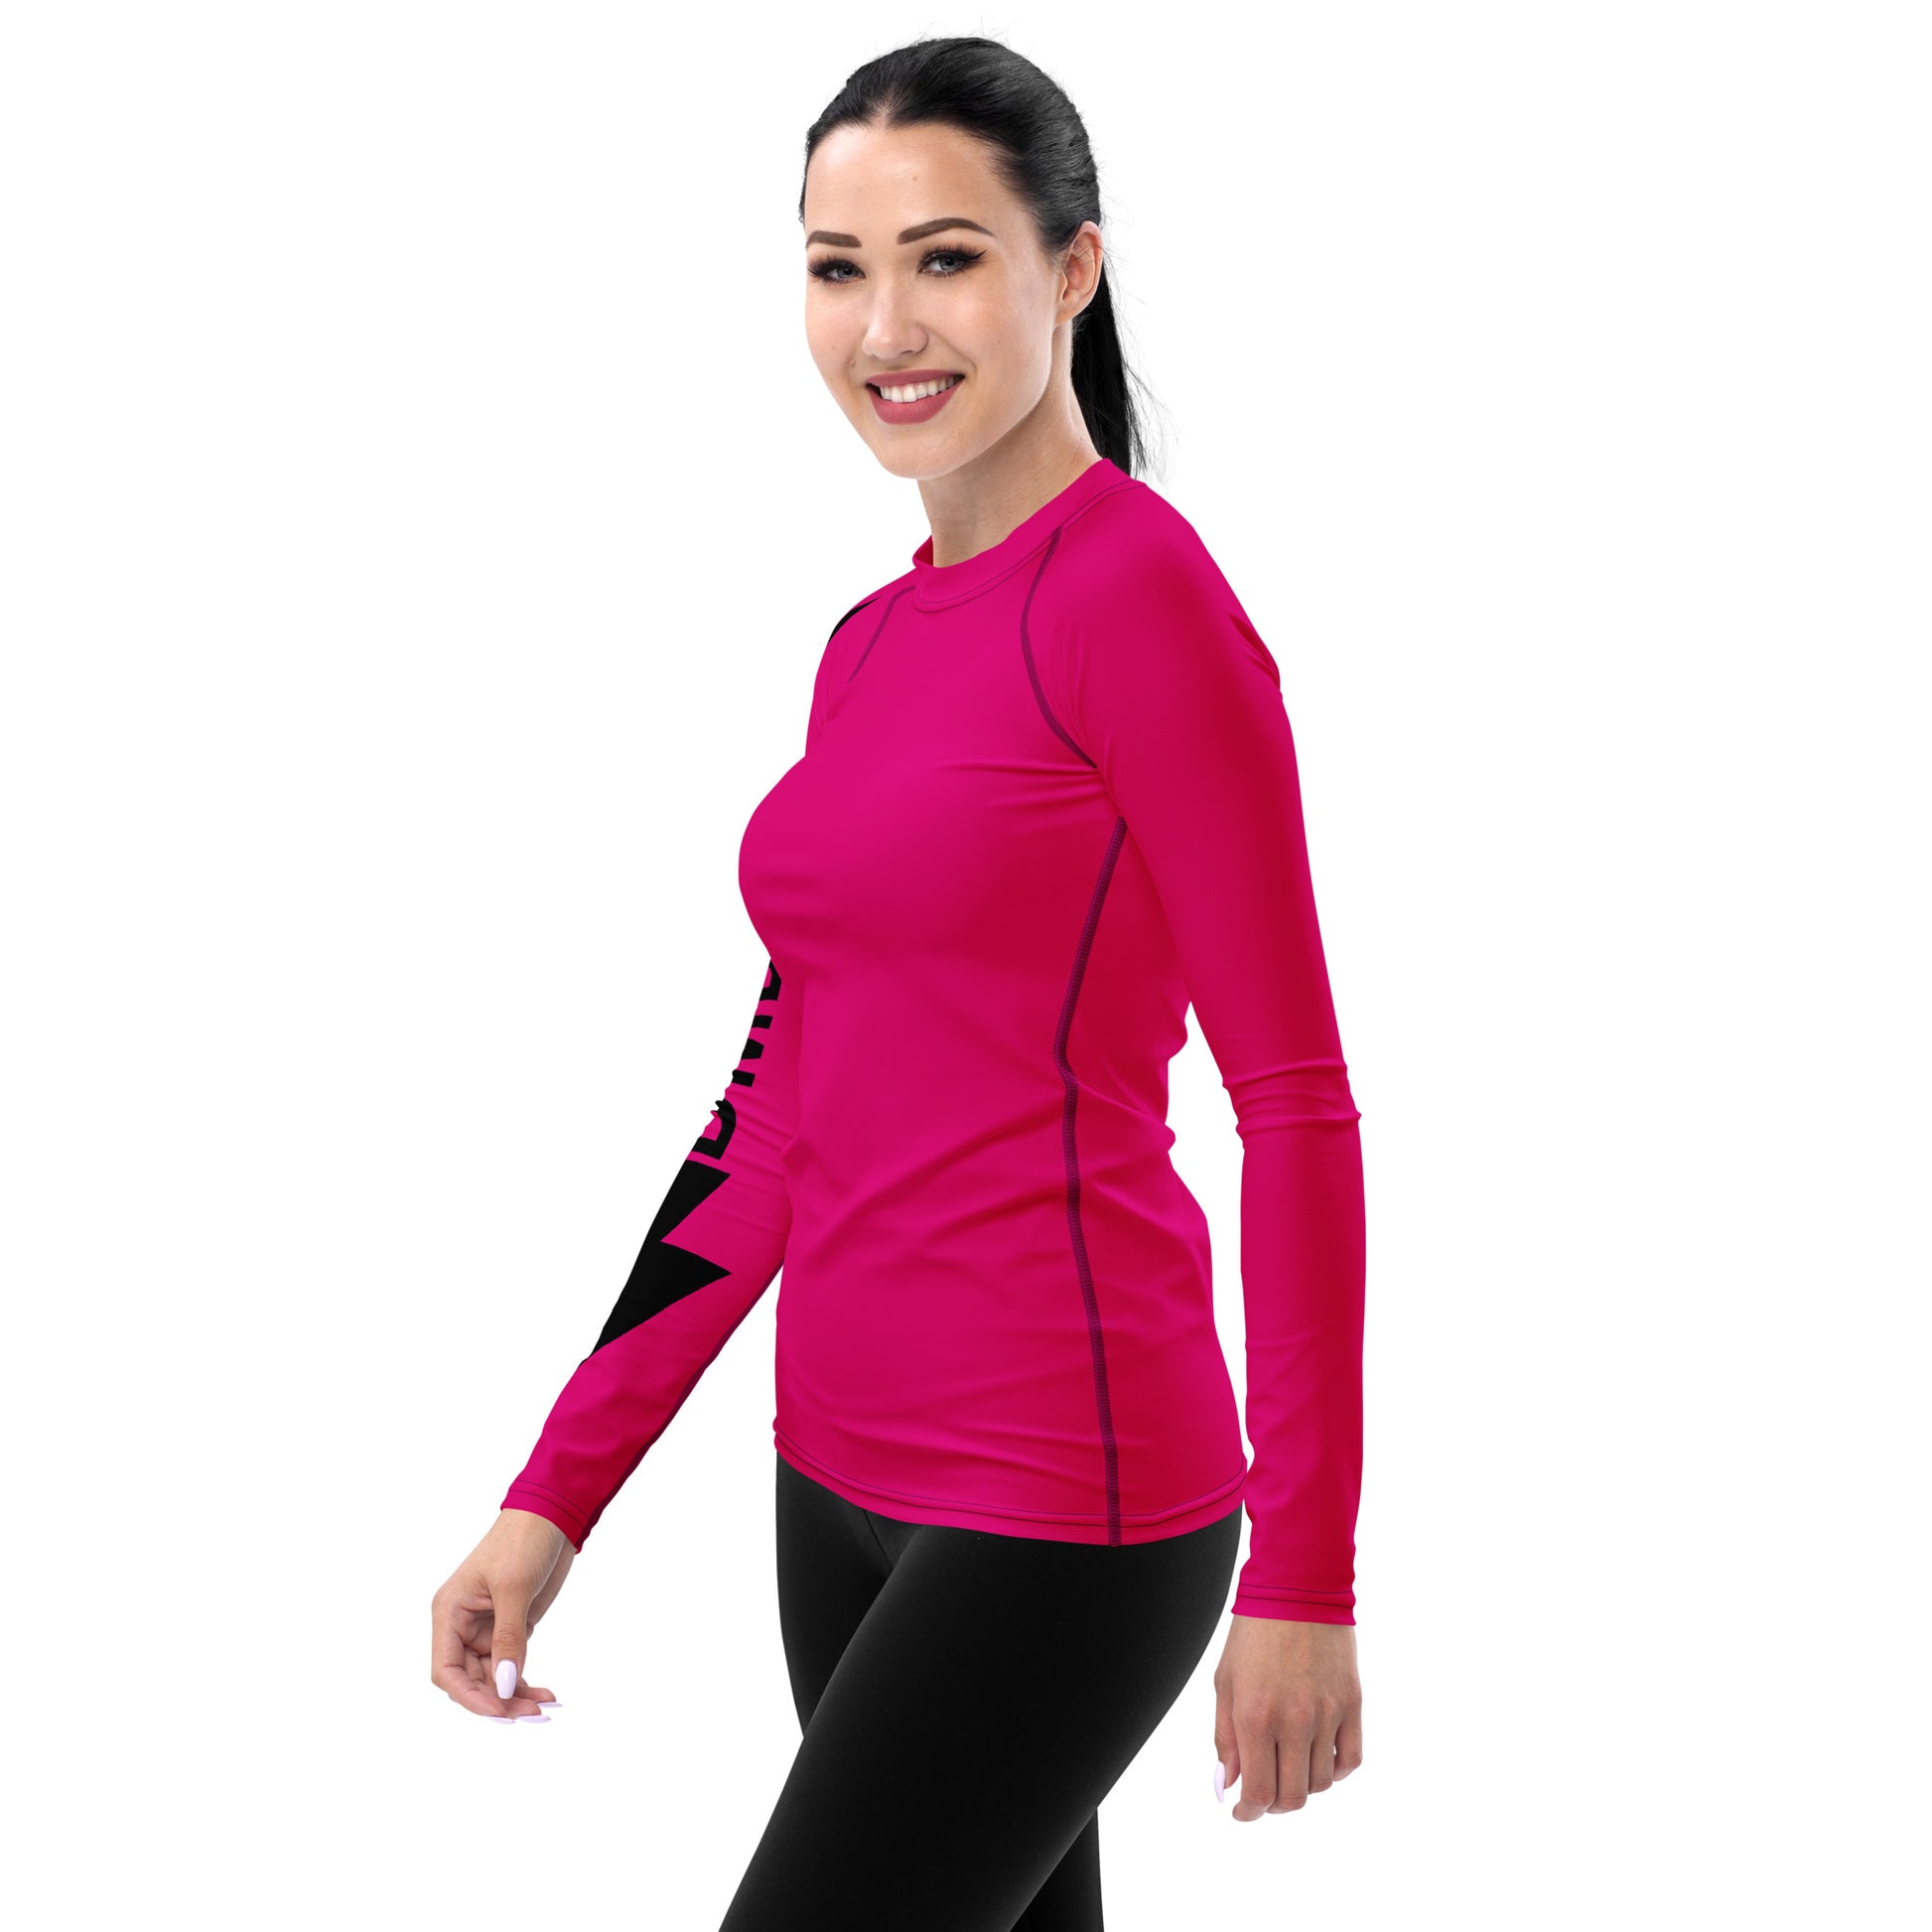 Lycra top. Active Wear-Layer or wear alone. - DMD Bags